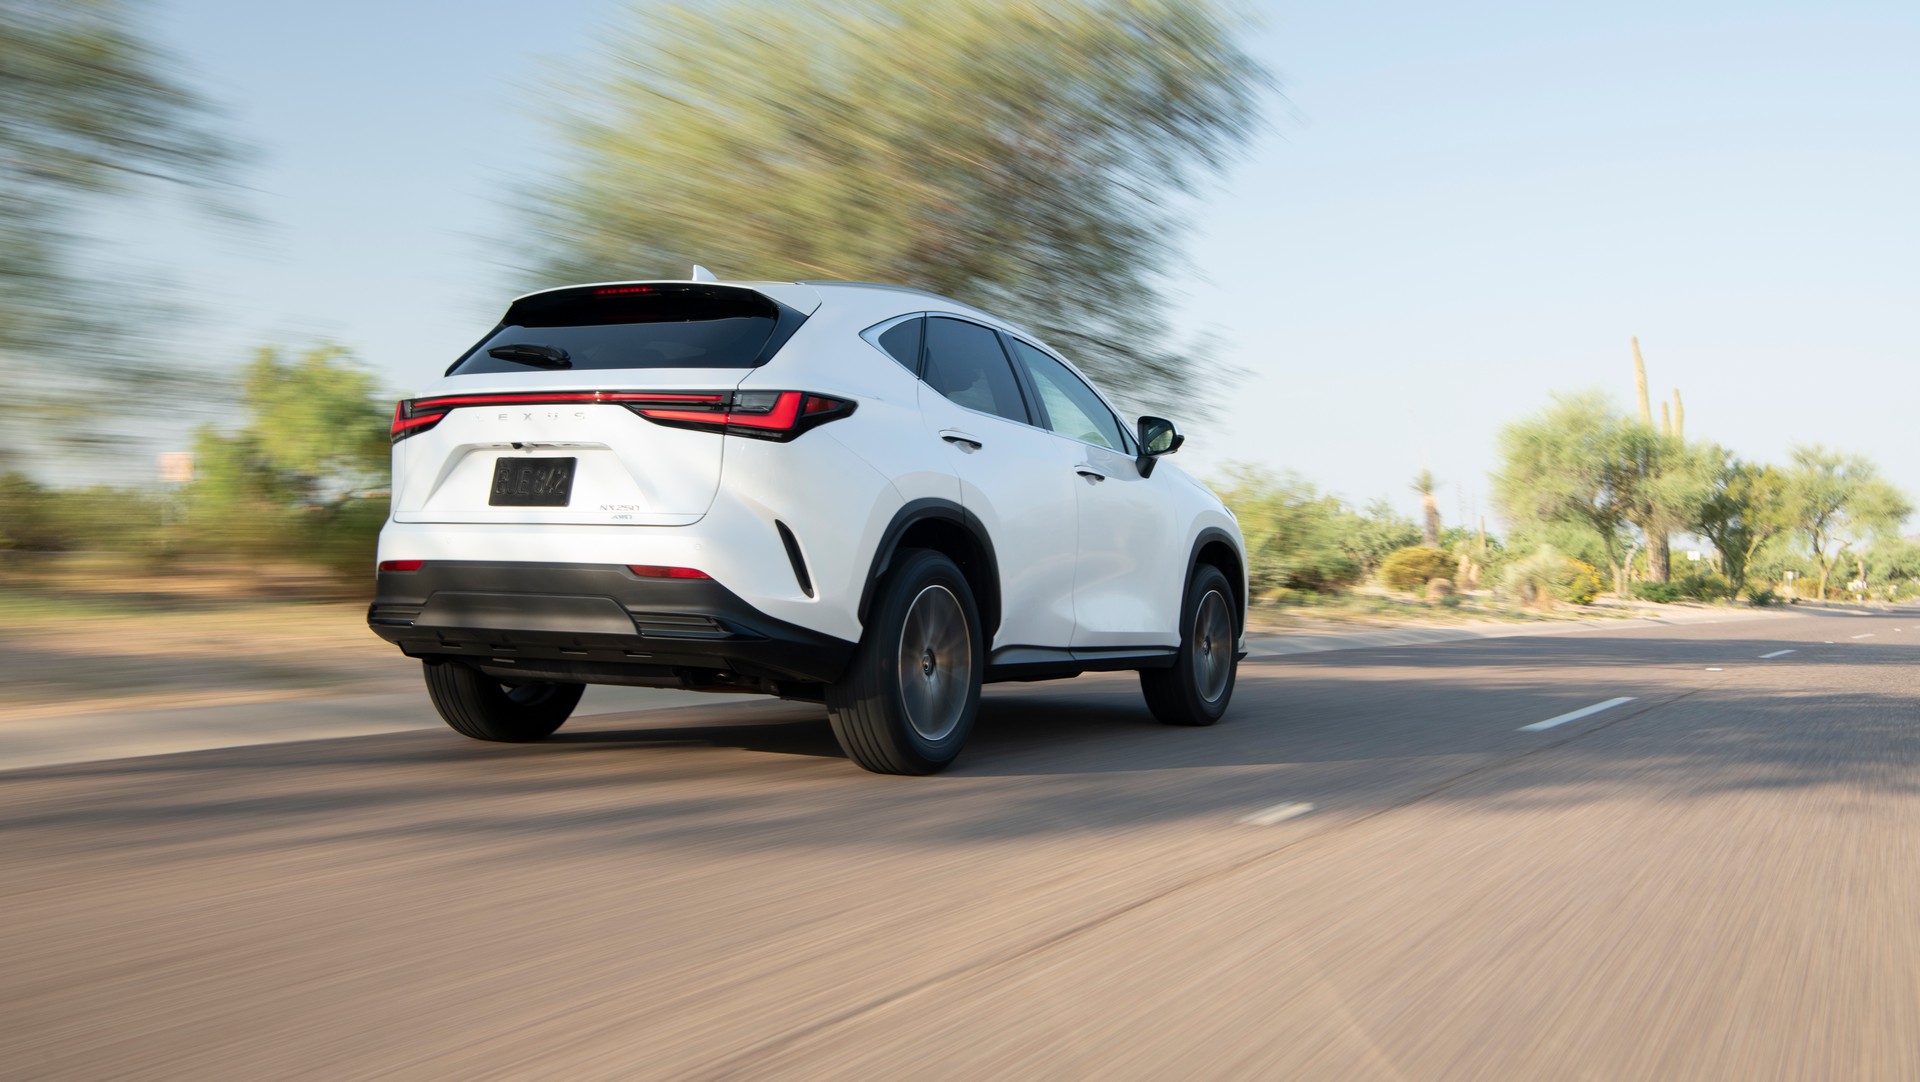 The New 2022 Lexus NX Starts At $37,950 While Plug-In Hybrid From $55,560 |  Carscoops